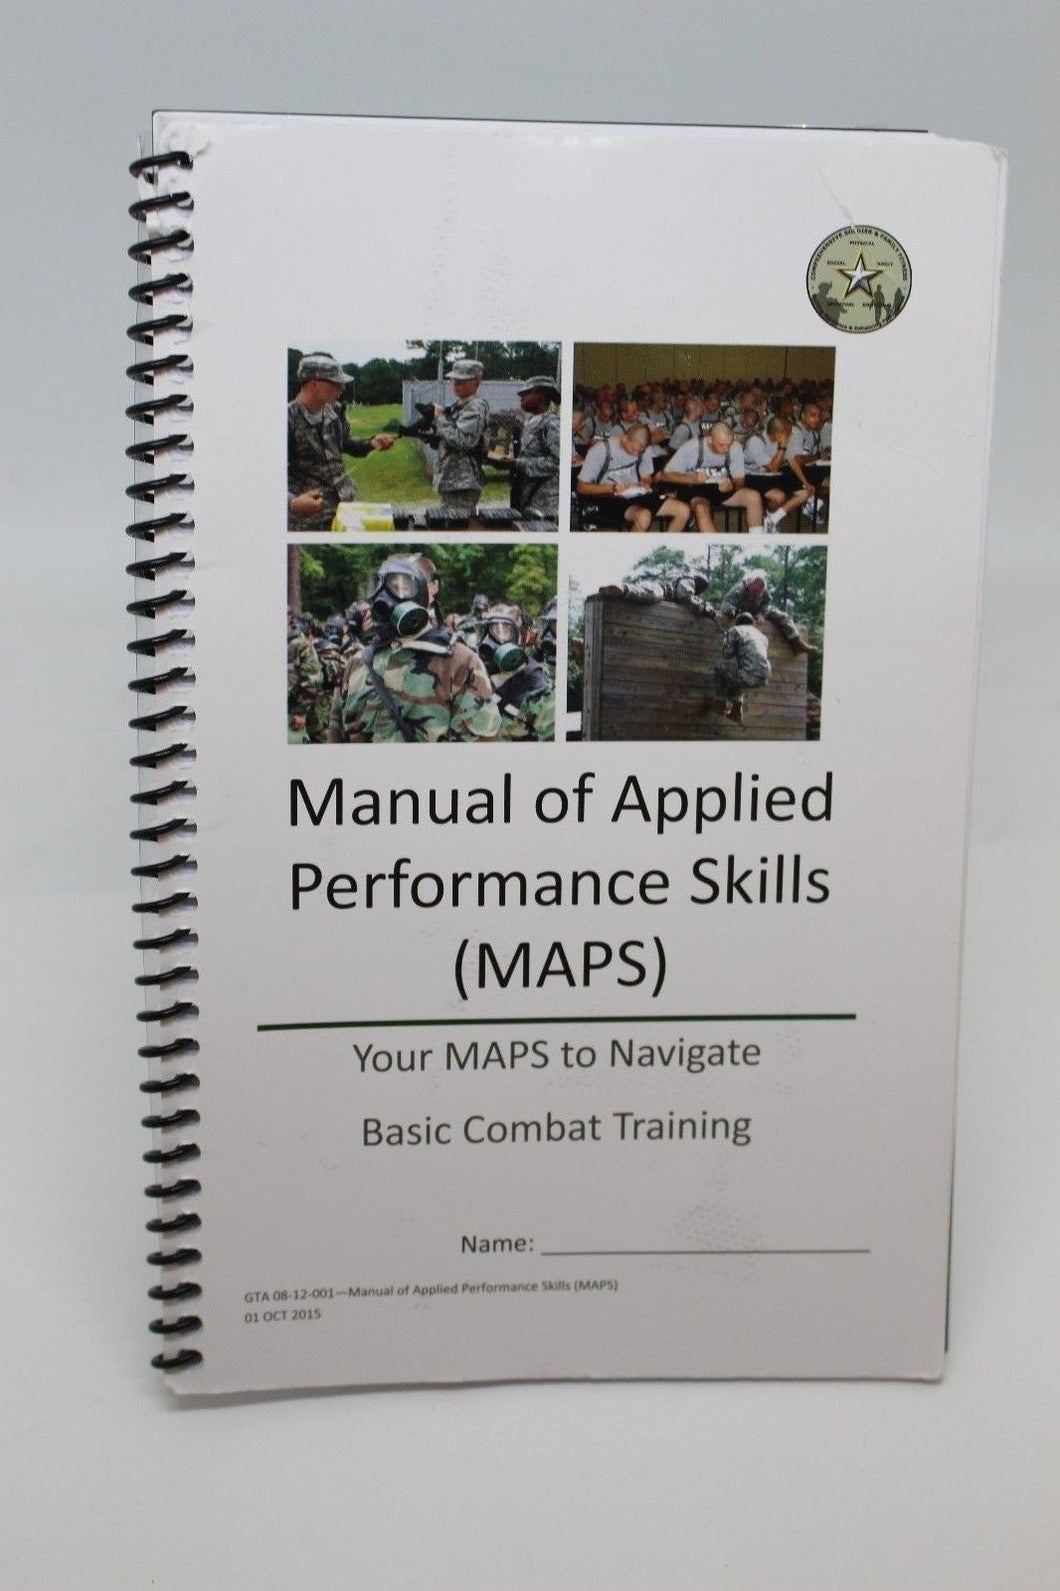 Manual of Applied Performance Skills (MAPS)